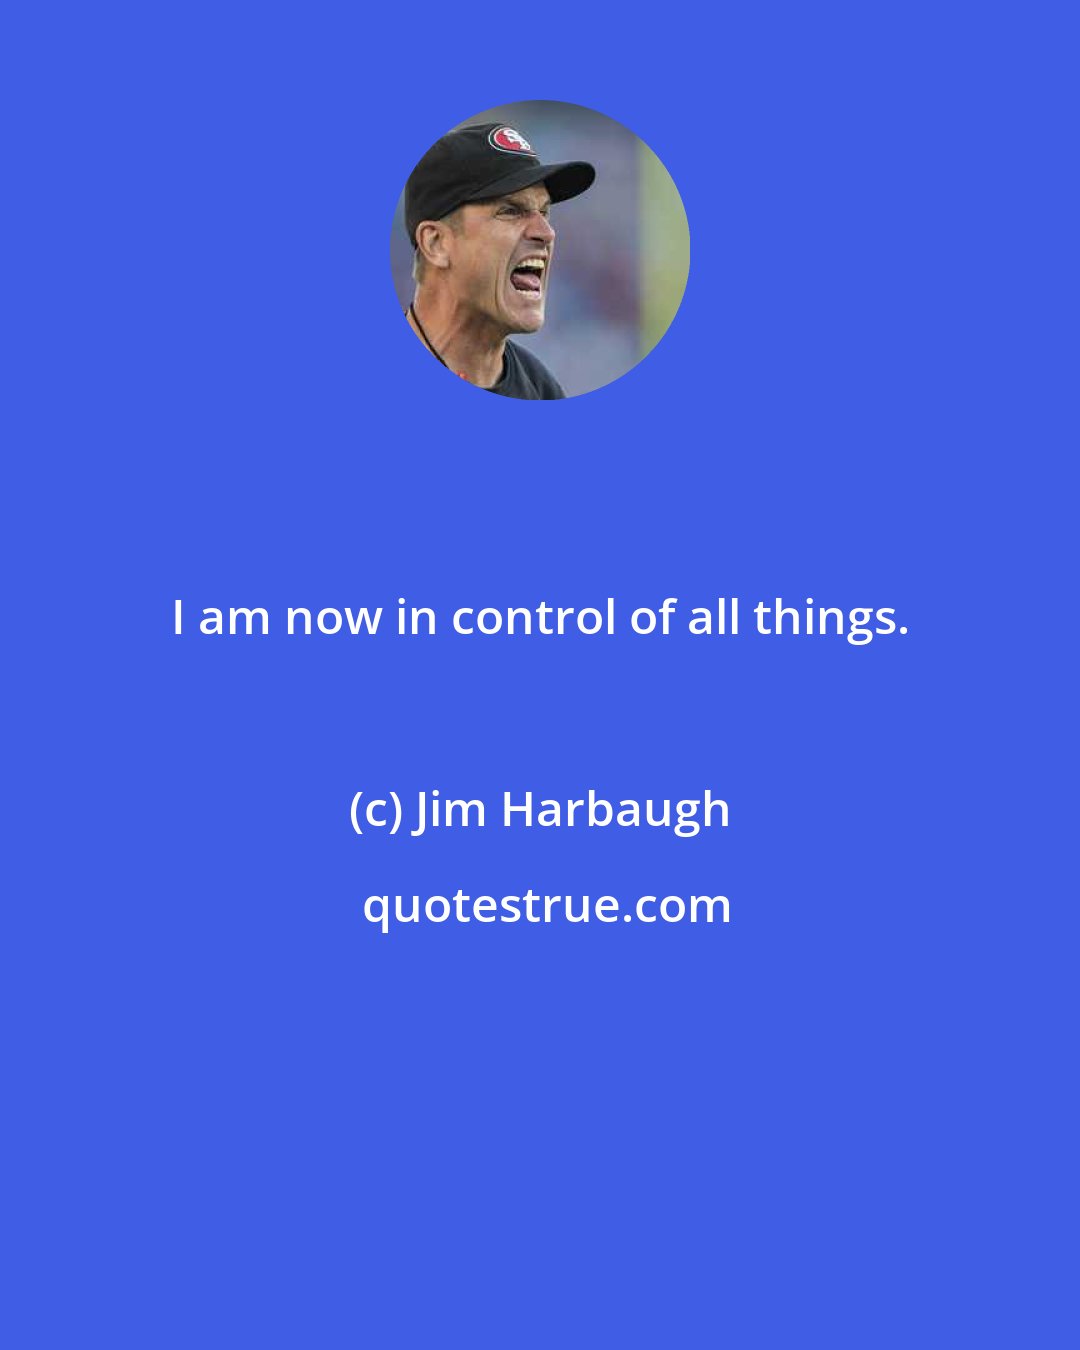 Jim Harbaugh: I am now in control of all things.